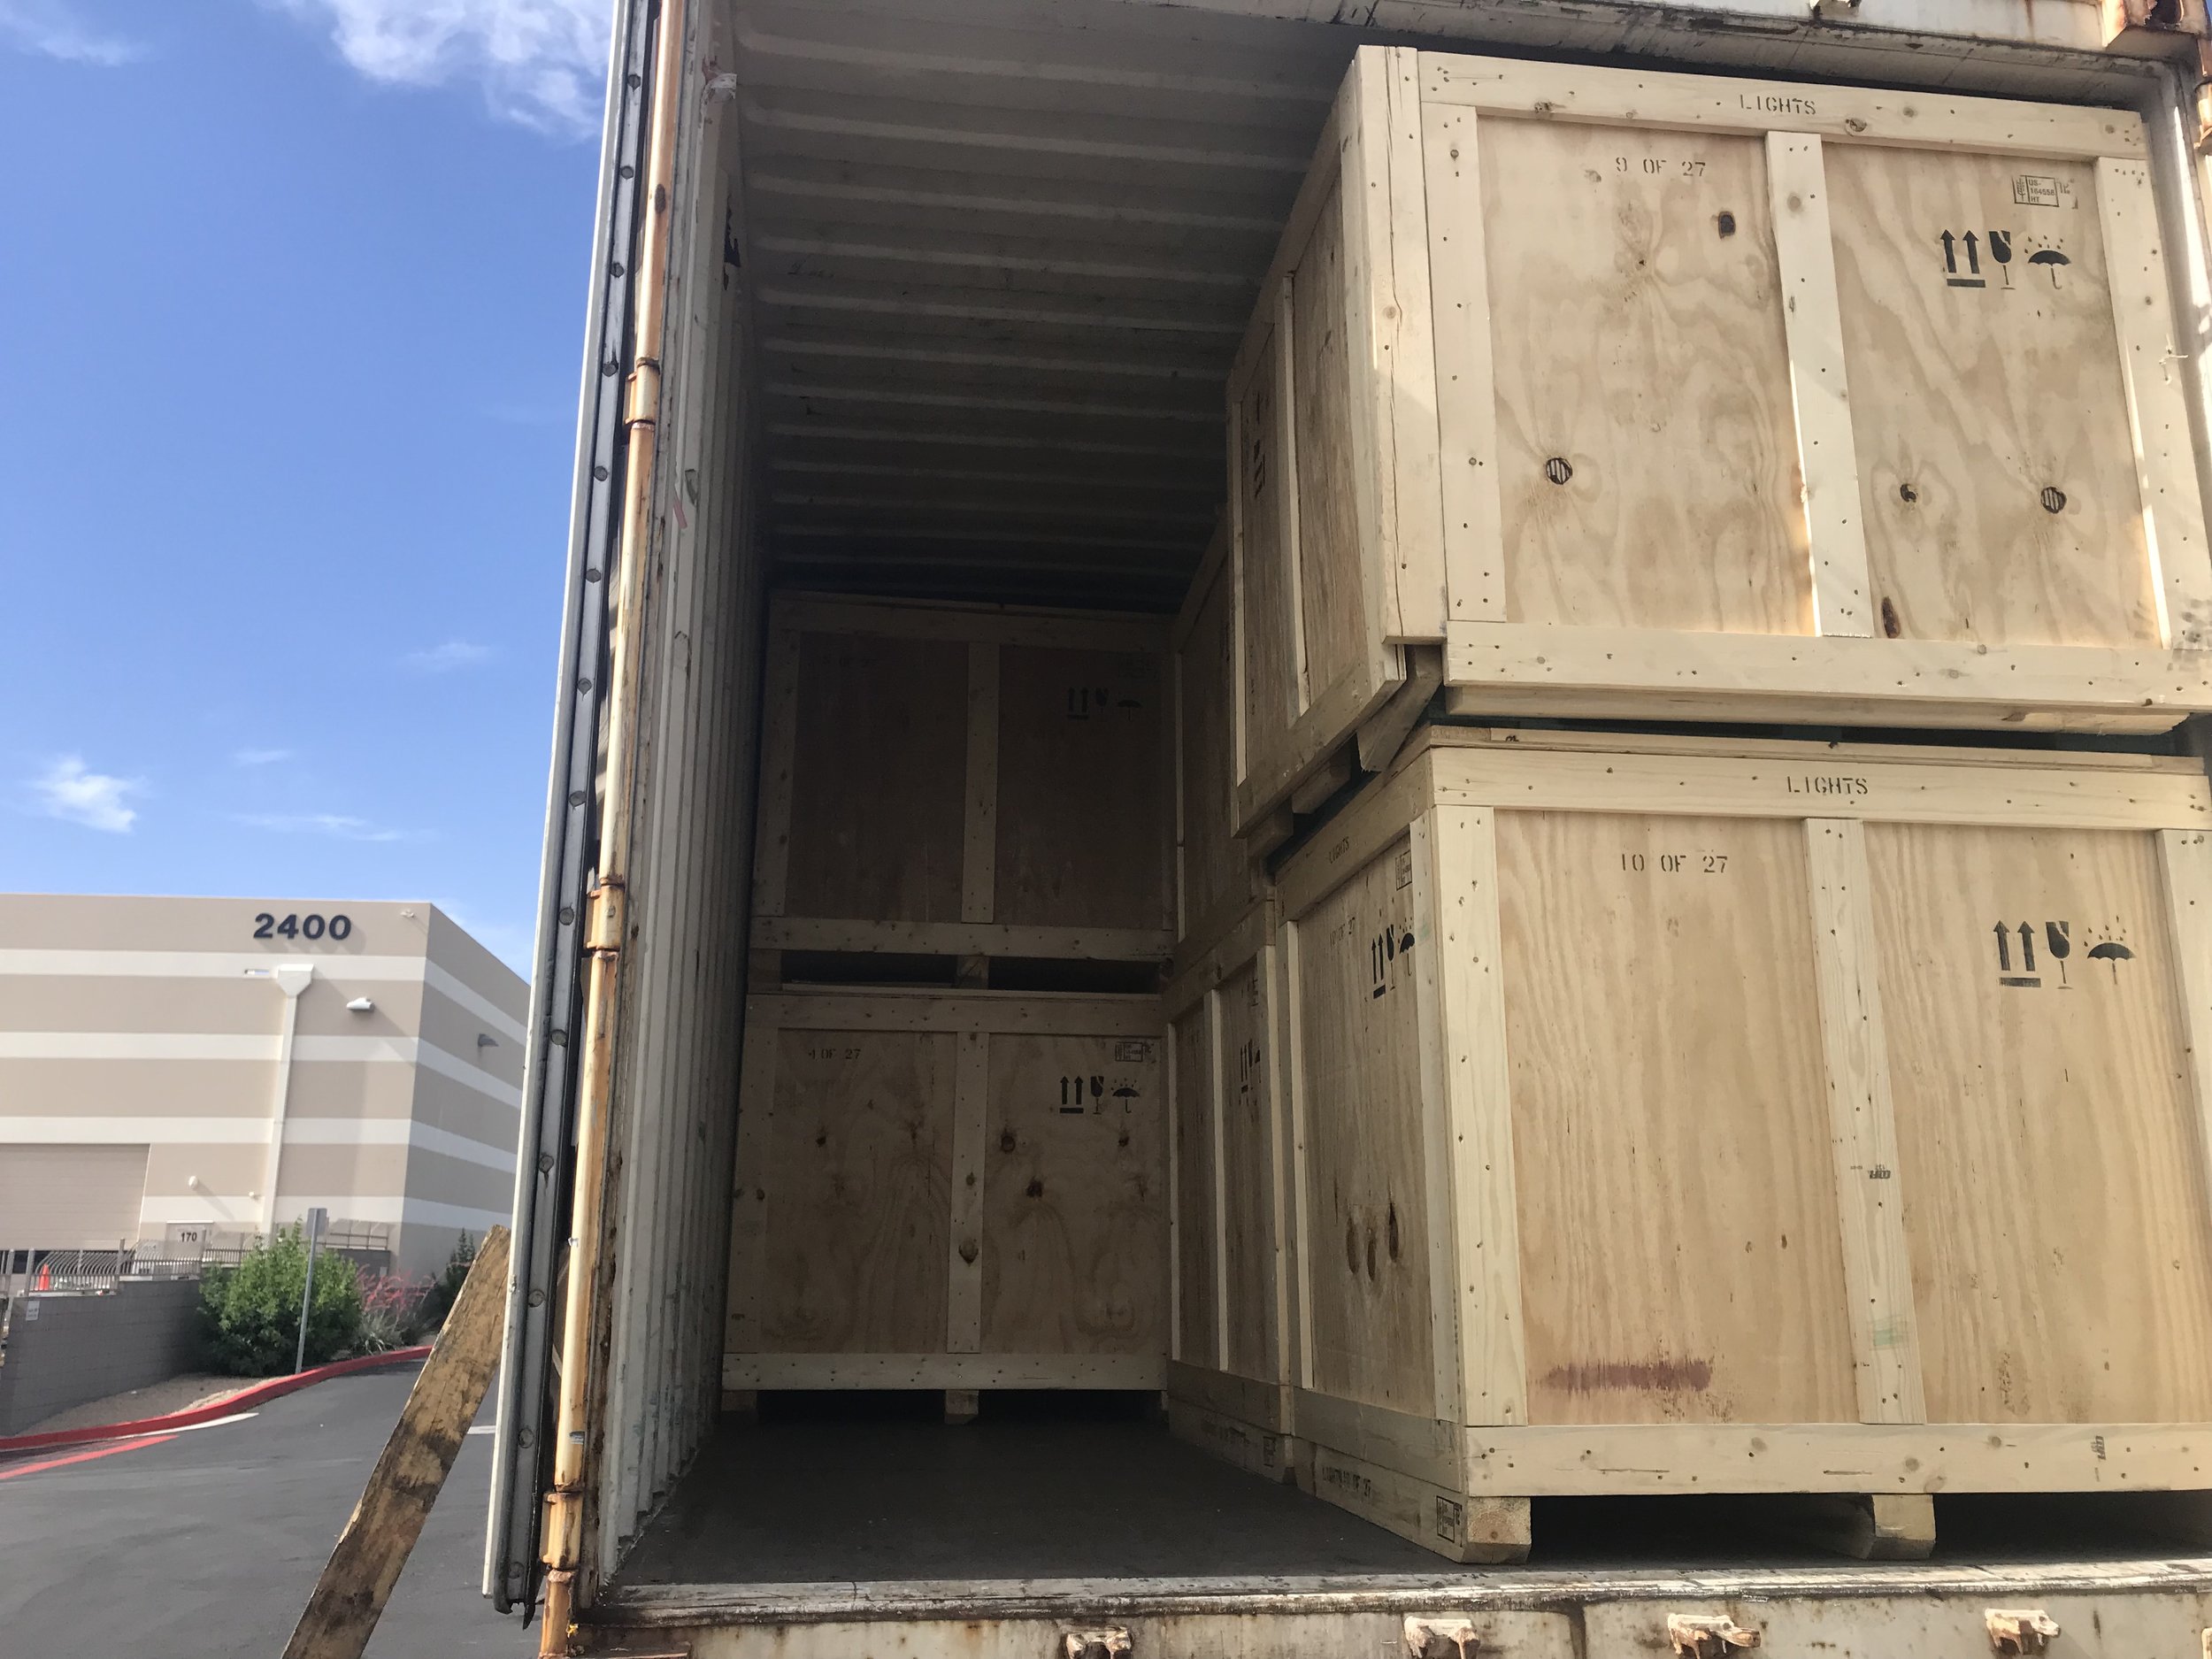 With minimal room to space, the boxes containing the branch were ready for departure.